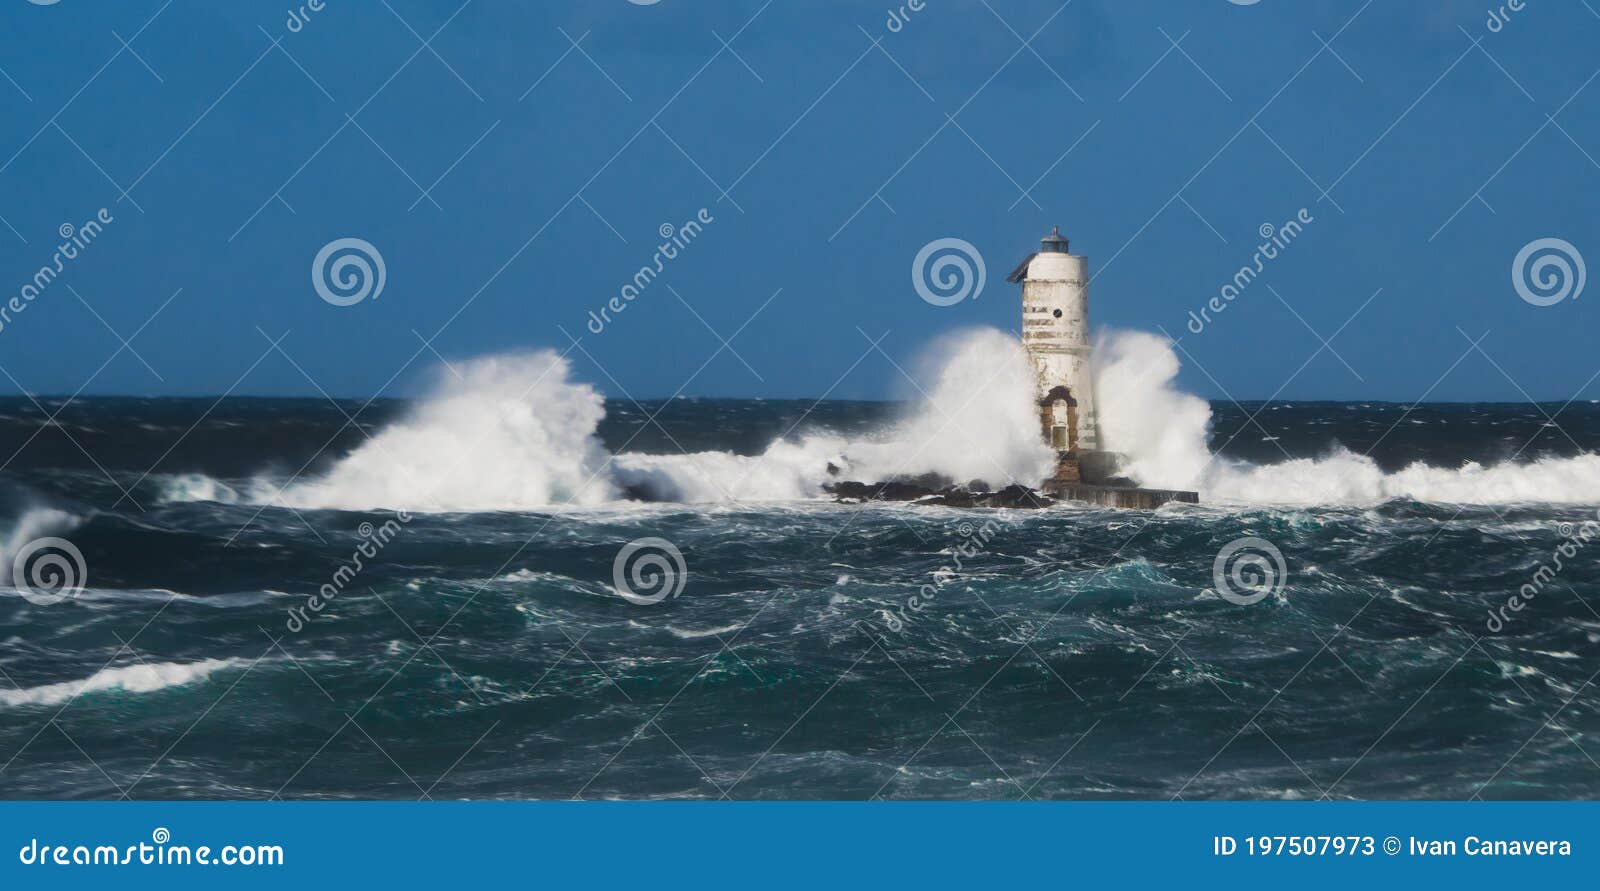 the lighthouse of the mangiabarche shrouded by the waves of a mistral wind storm